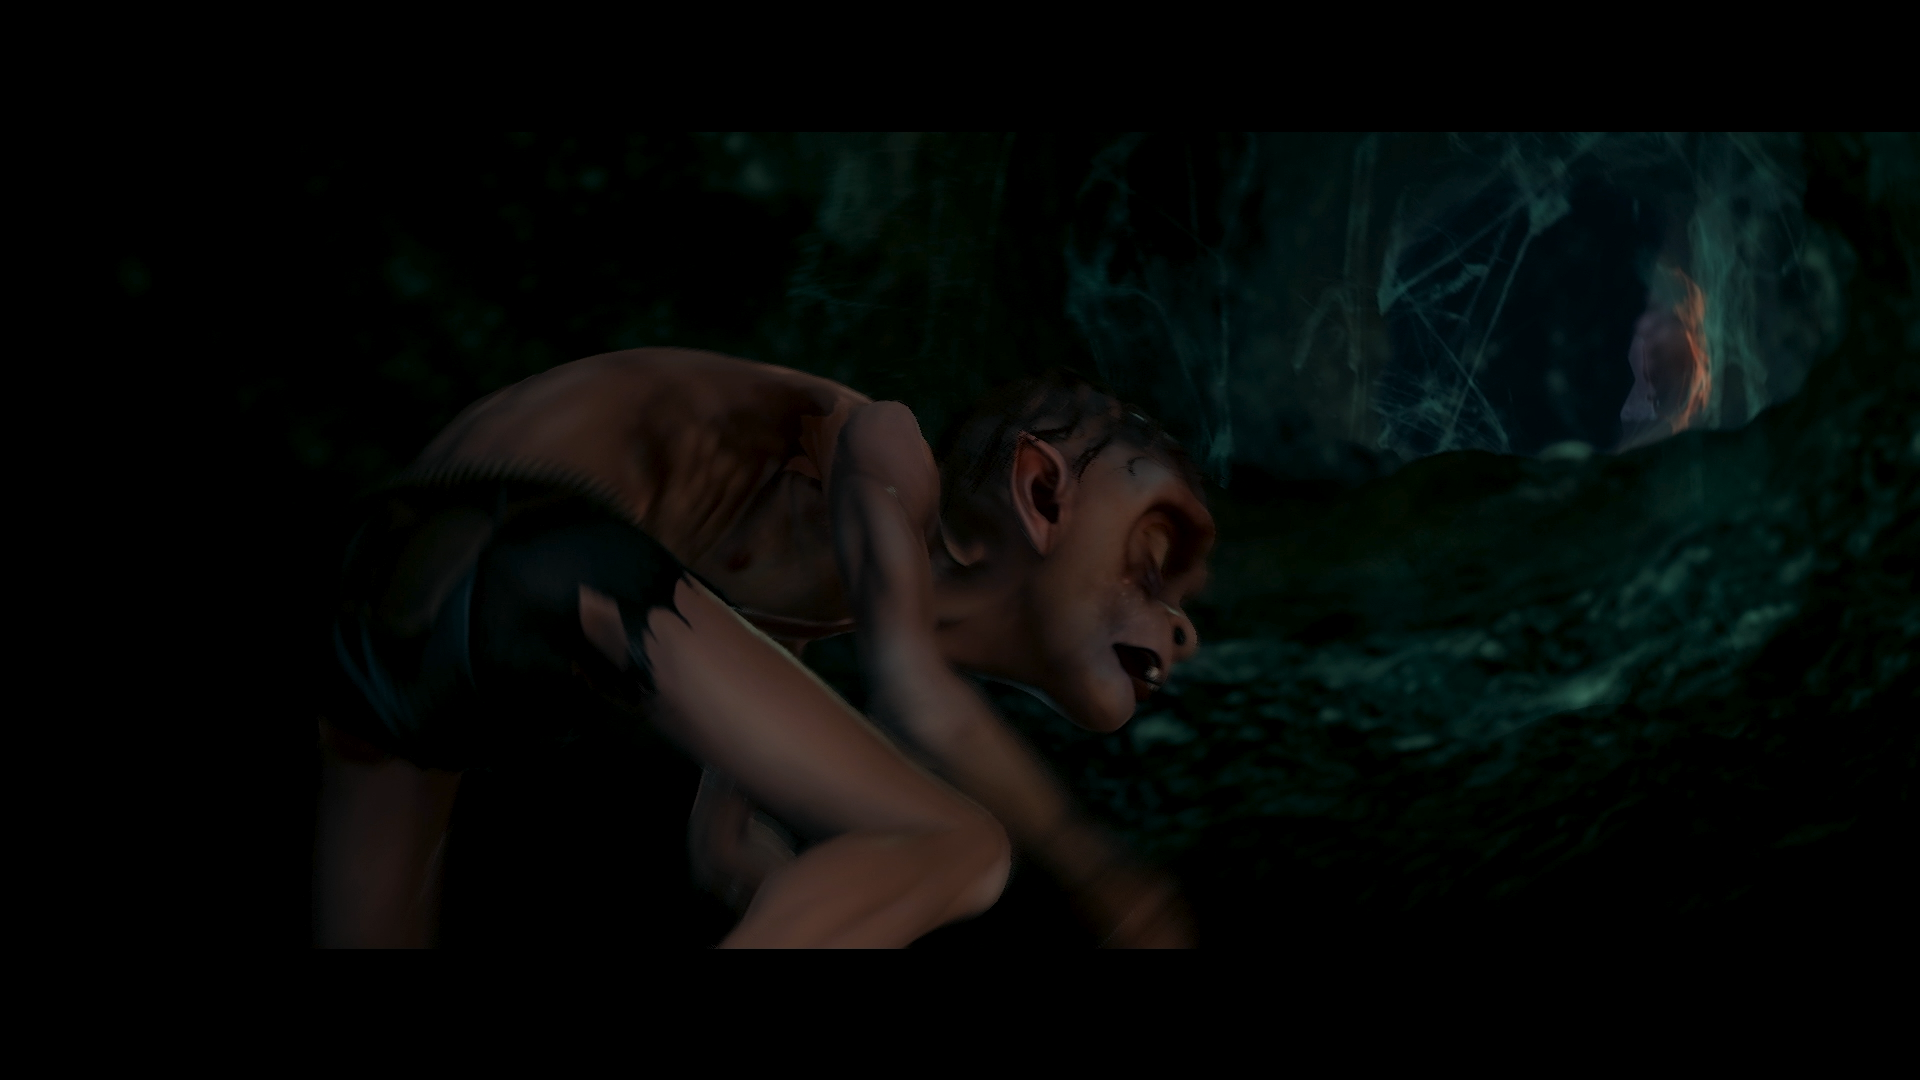 The Lord of the Rings: Gollum Gameplay Reveal Trailer